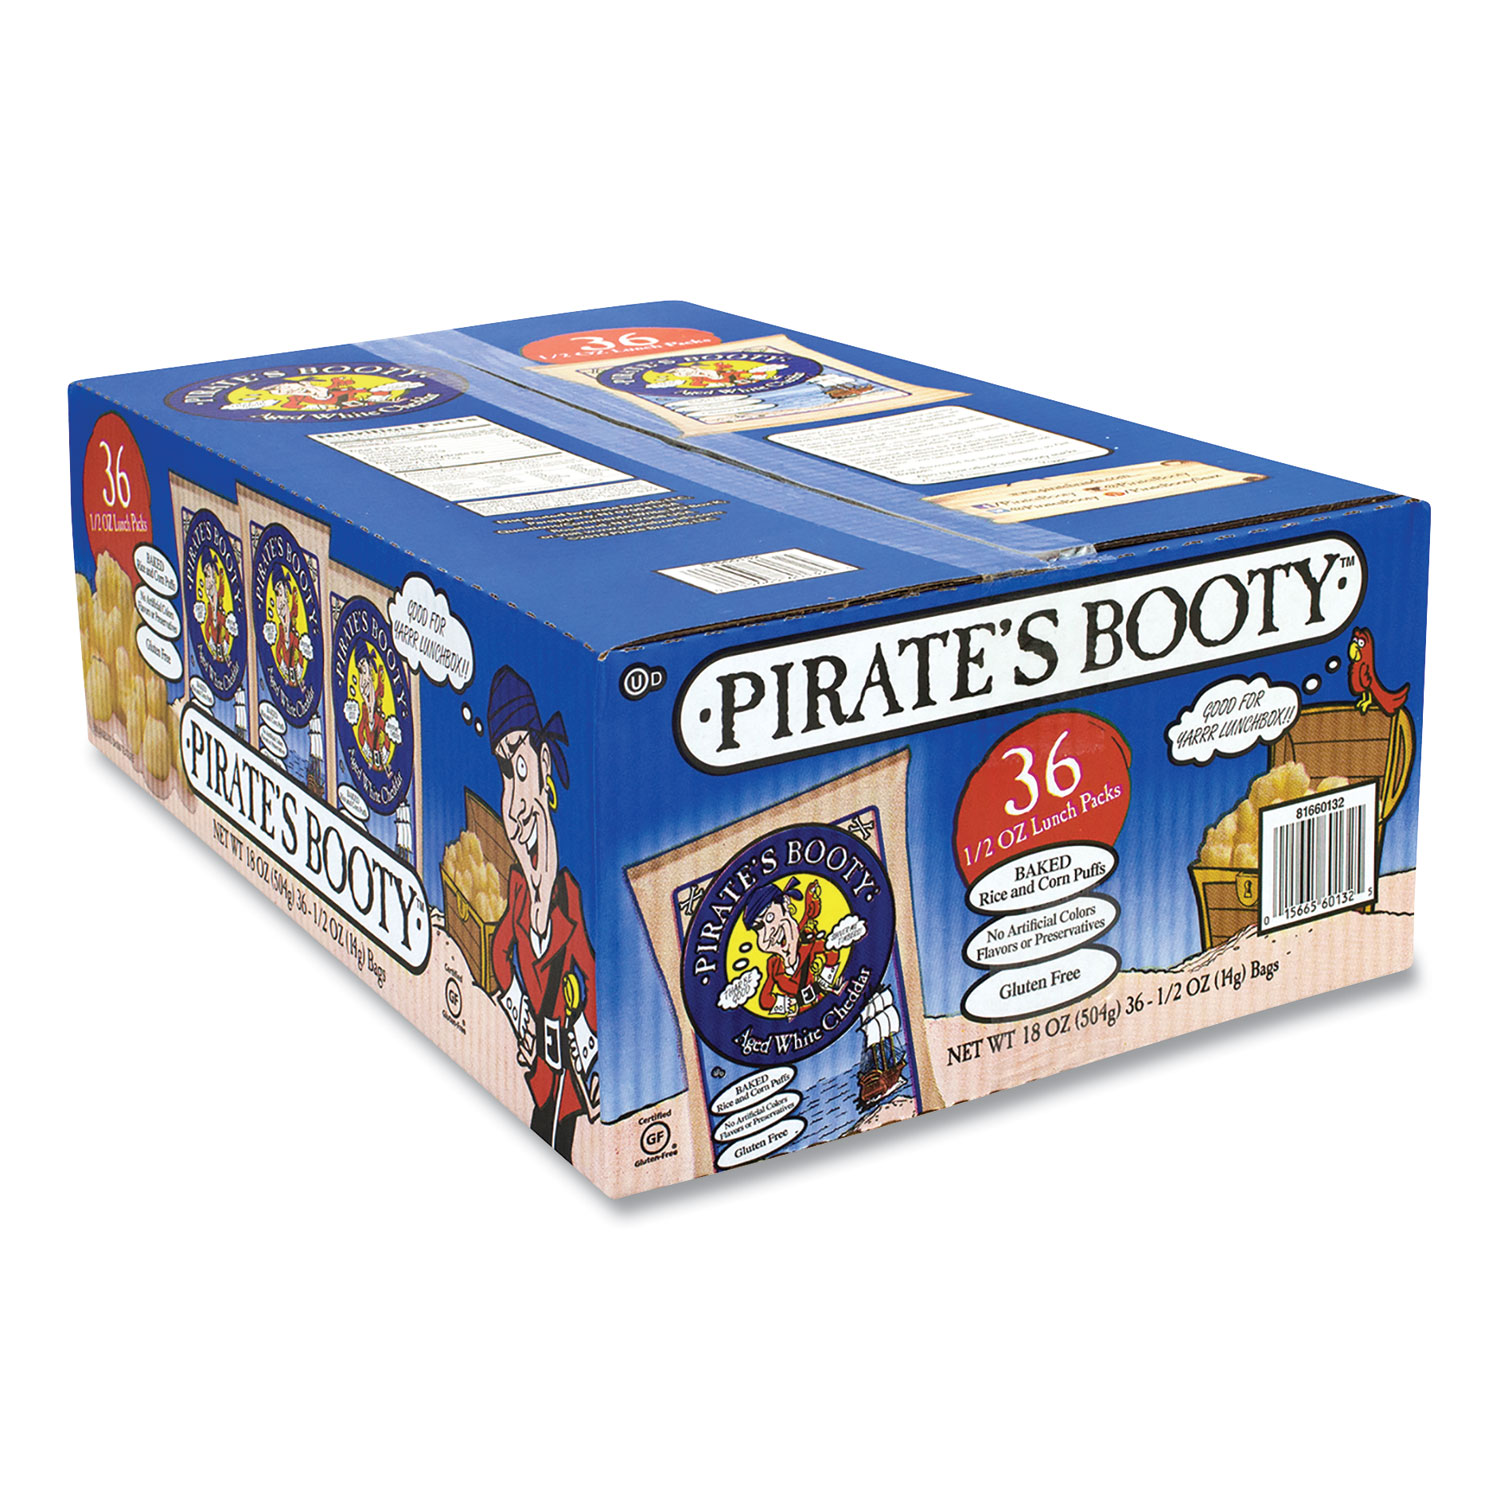  Pirate's Booty 19266 Puffs, Aged White Cheddar, 0.5 oz Bag, 36/Box, Free Delivery in 1-4 Business Days (GRR22000092) 